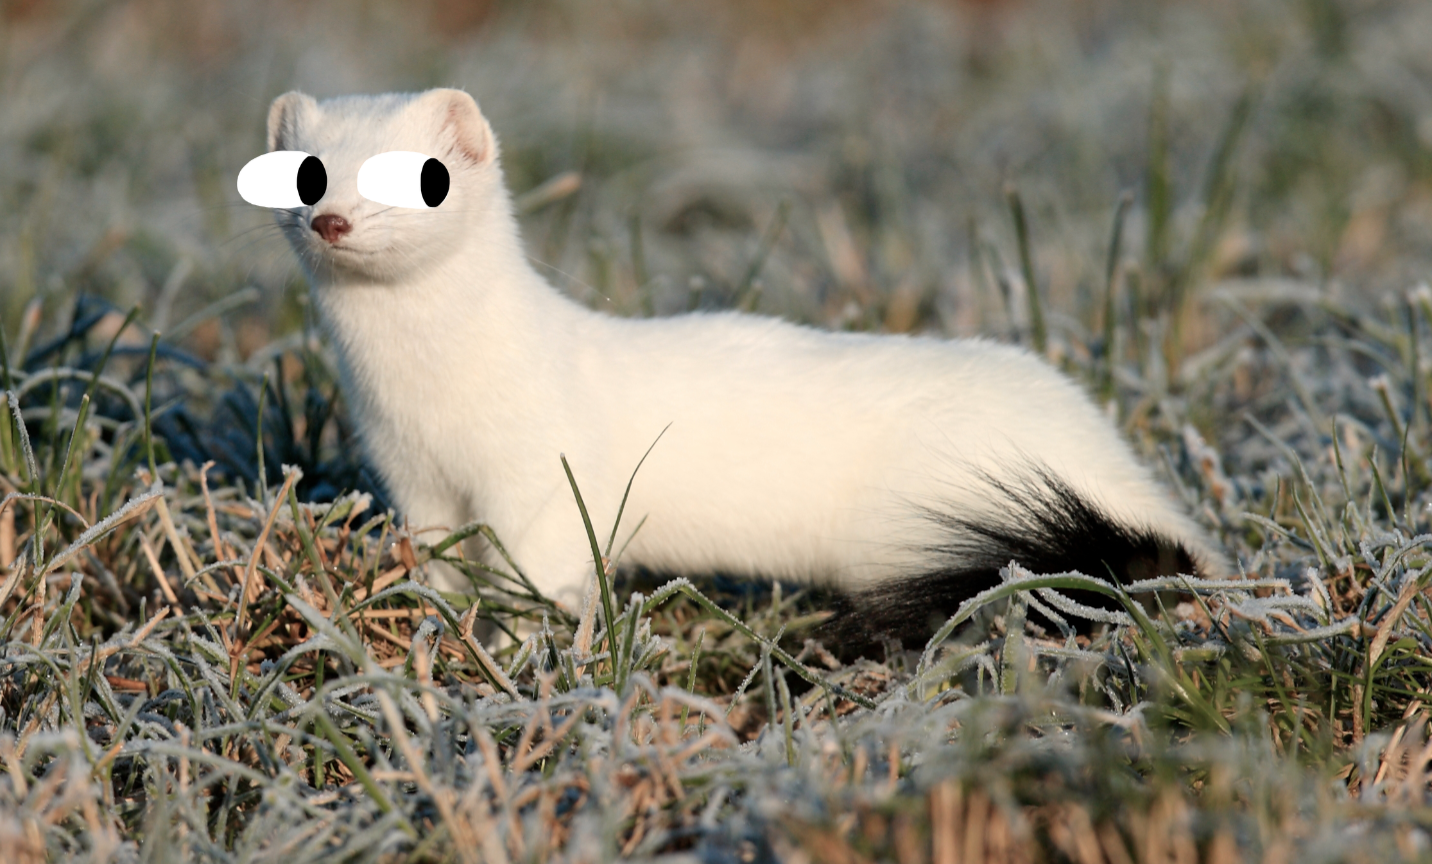 Image shows a long and thin, white rodent